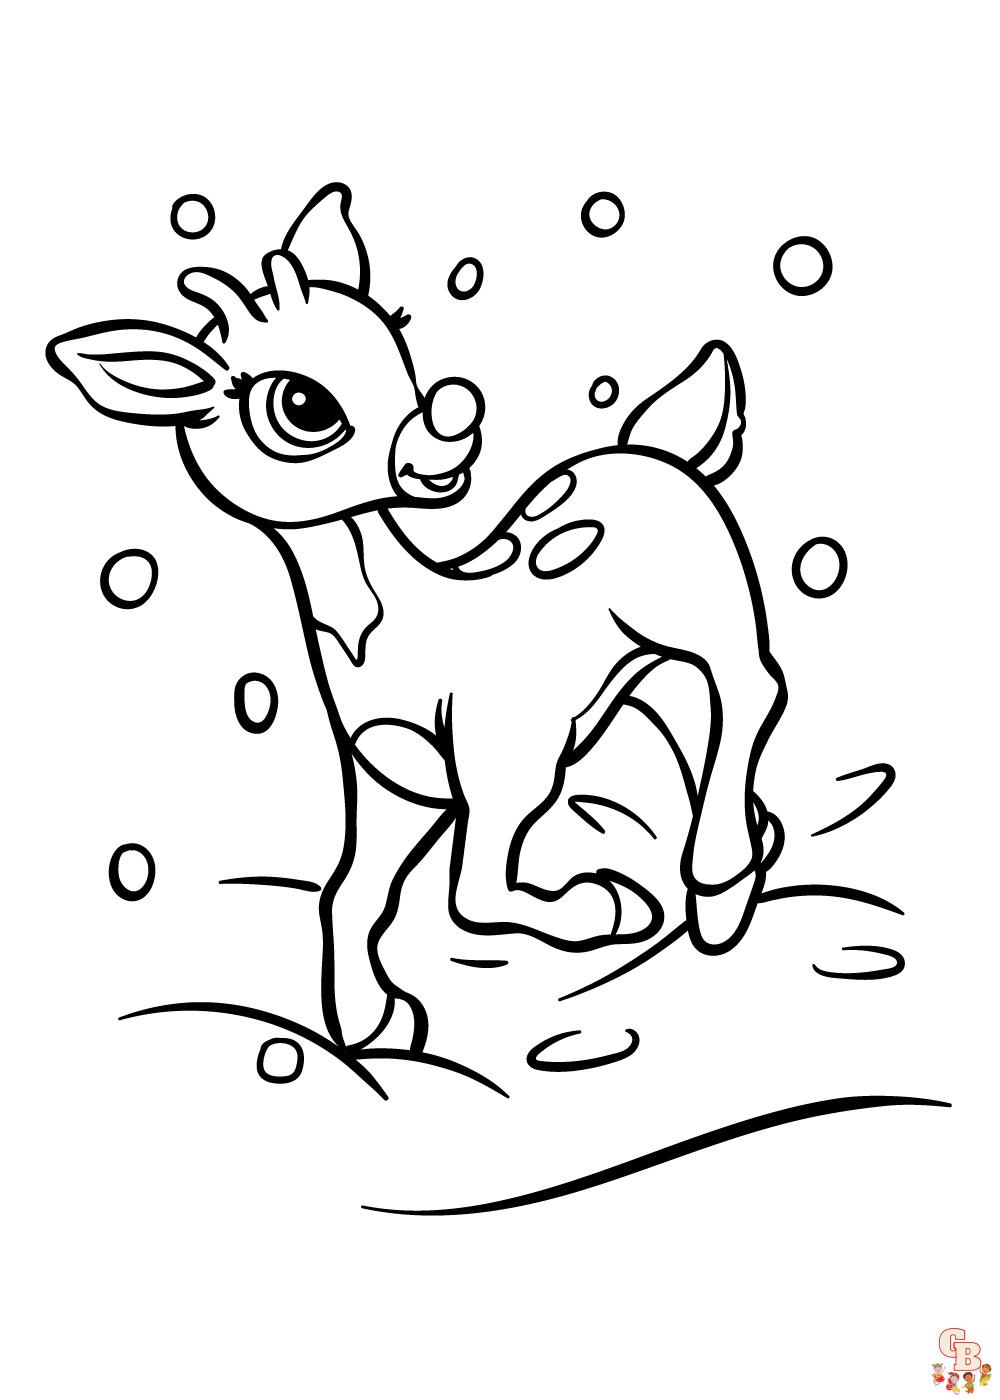 Rudolph red nosed reindeer coloring pages printable for kids